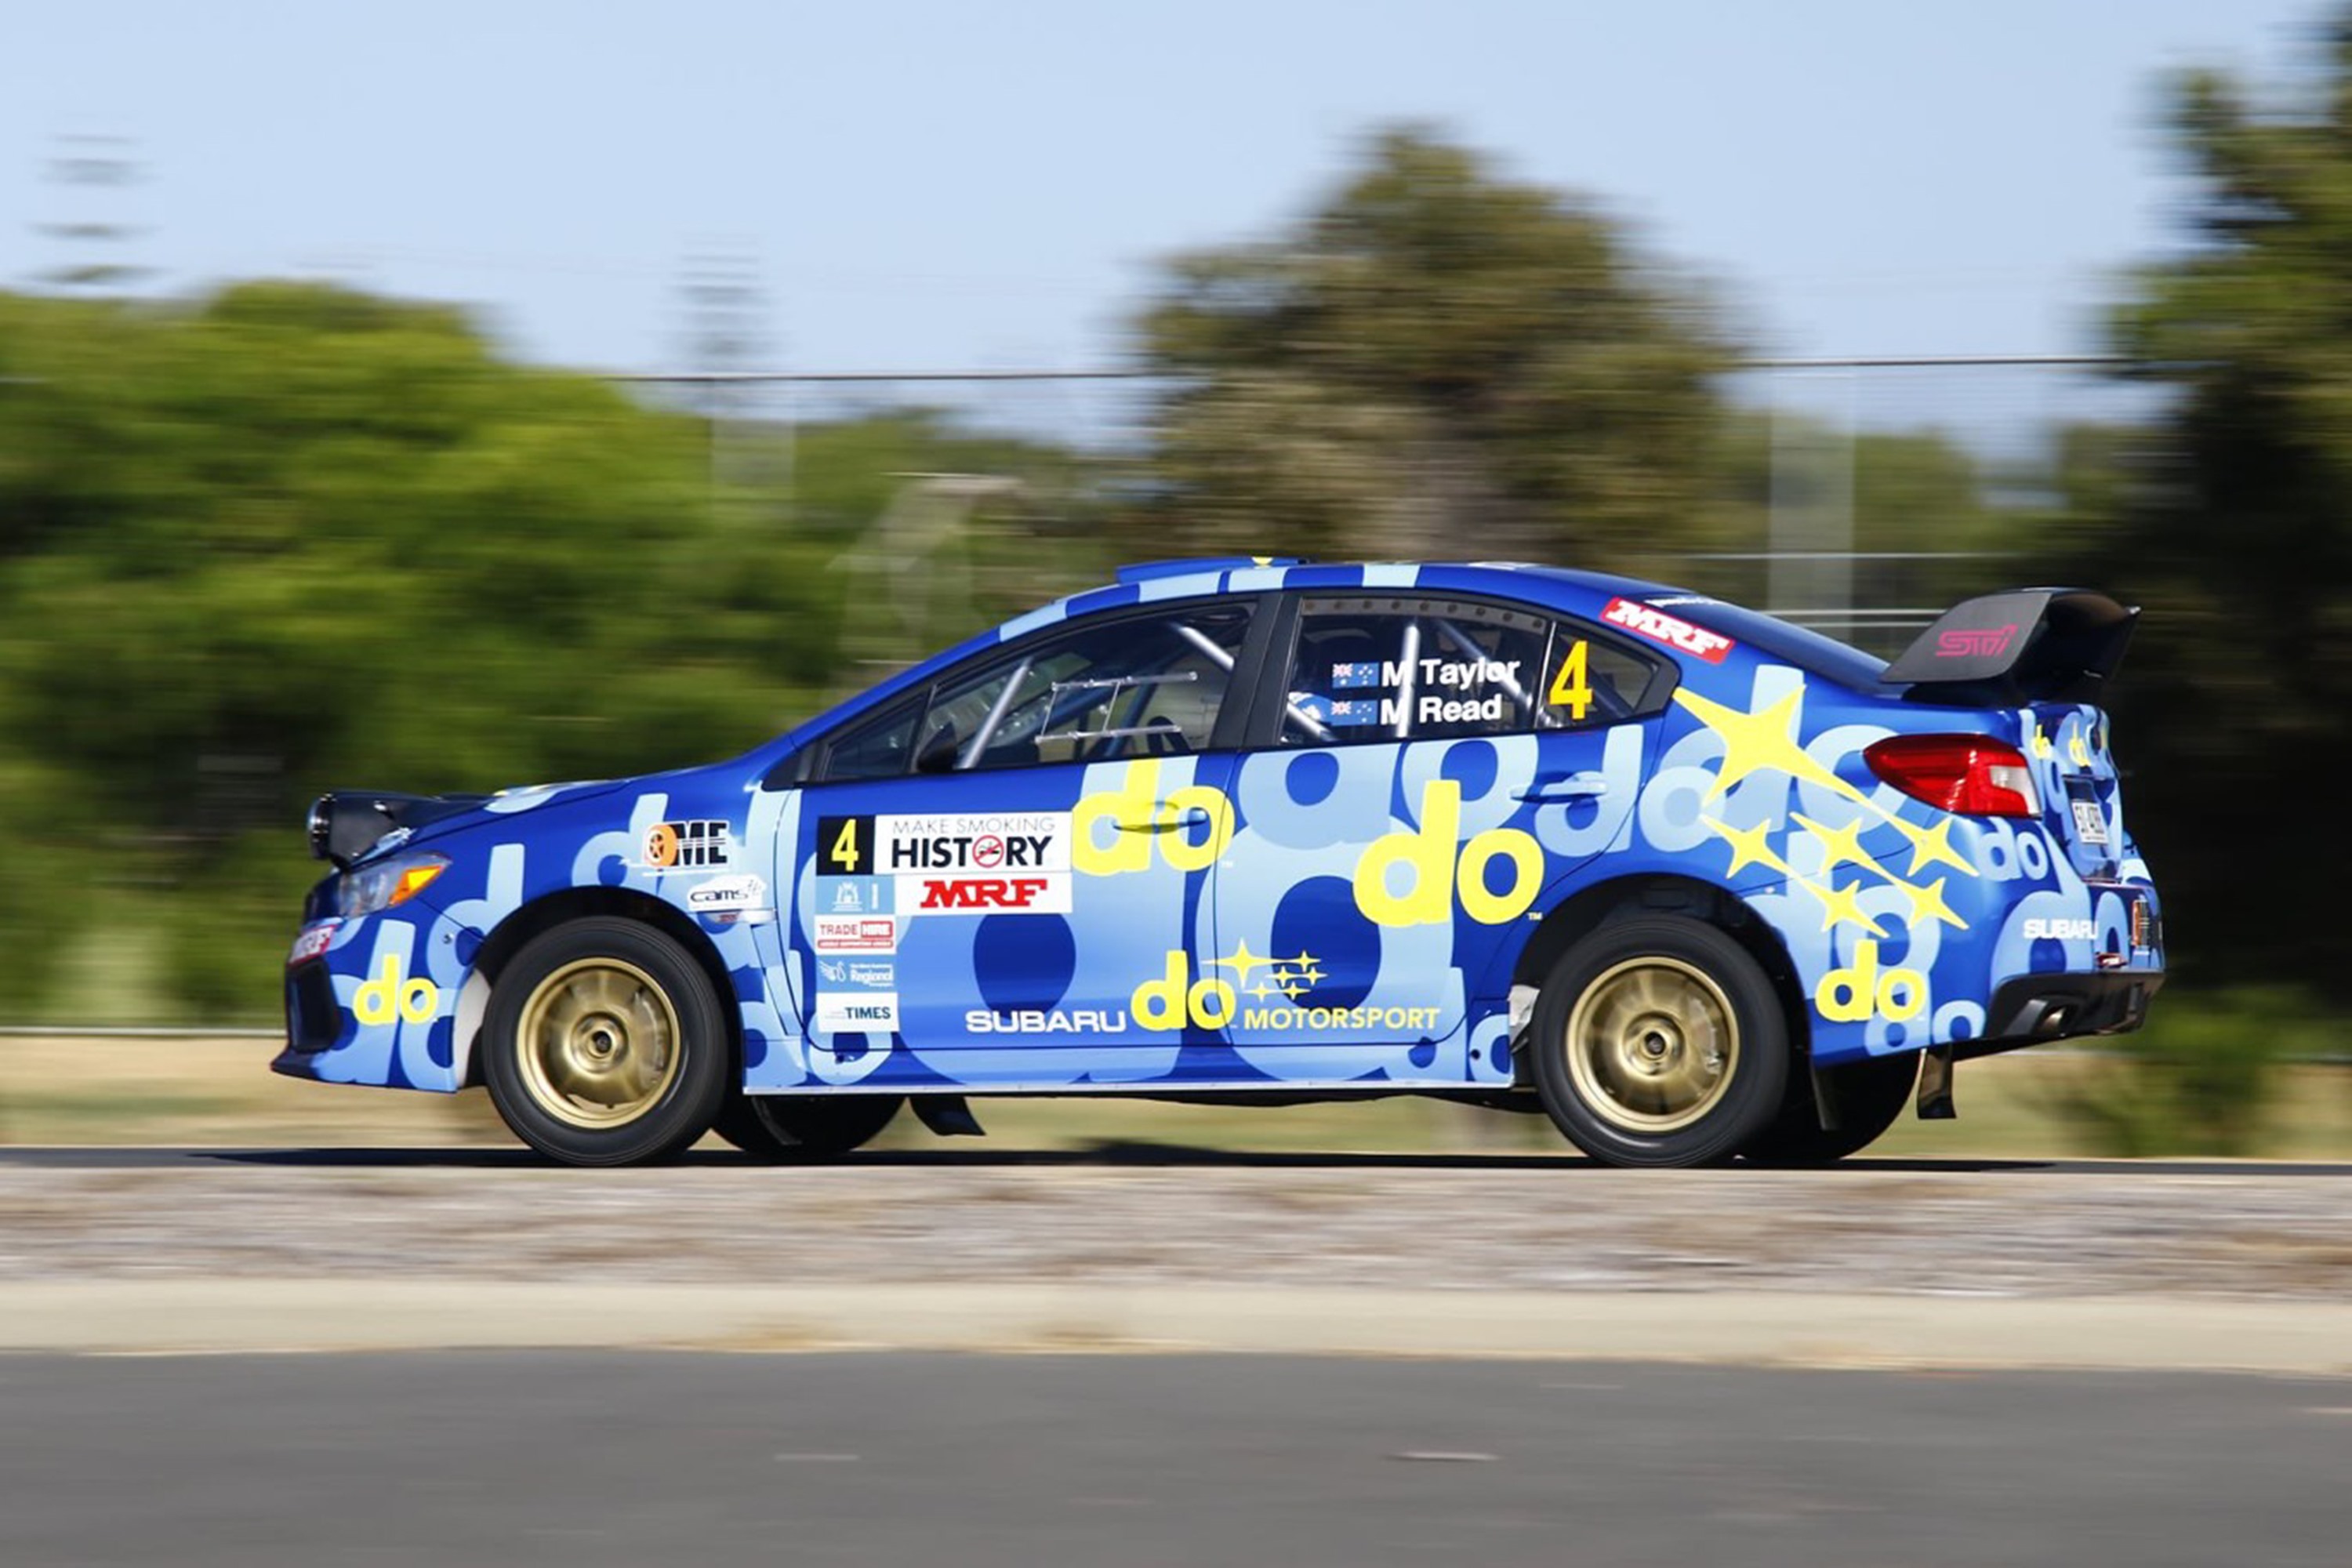 The Orange Motorsport Engineering-prepared All-Wheel Drive Subaru WRX STI  of Molly Taylor and co-driver Malcolm Read finished Heat 1 in fourth place after a modest start on last night's two quick Super Special Stage runs around Busselton's Barnard Park.